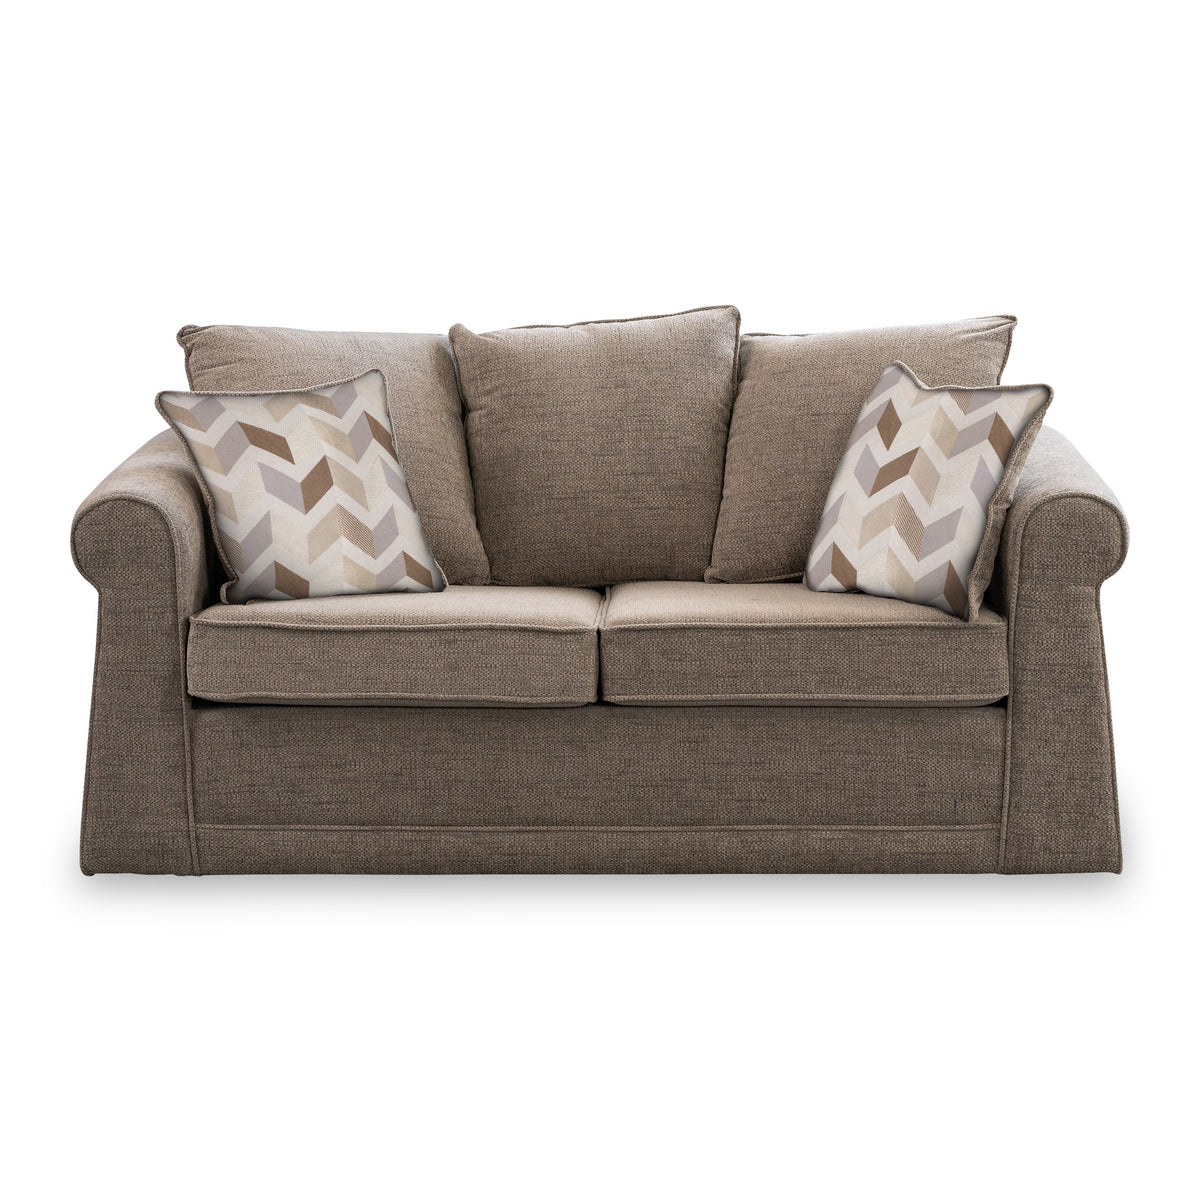 Branston Fawn Soft Weave 2 Seater Sofabed with Oatmeal Scatter Cushions from Roseland Furniture